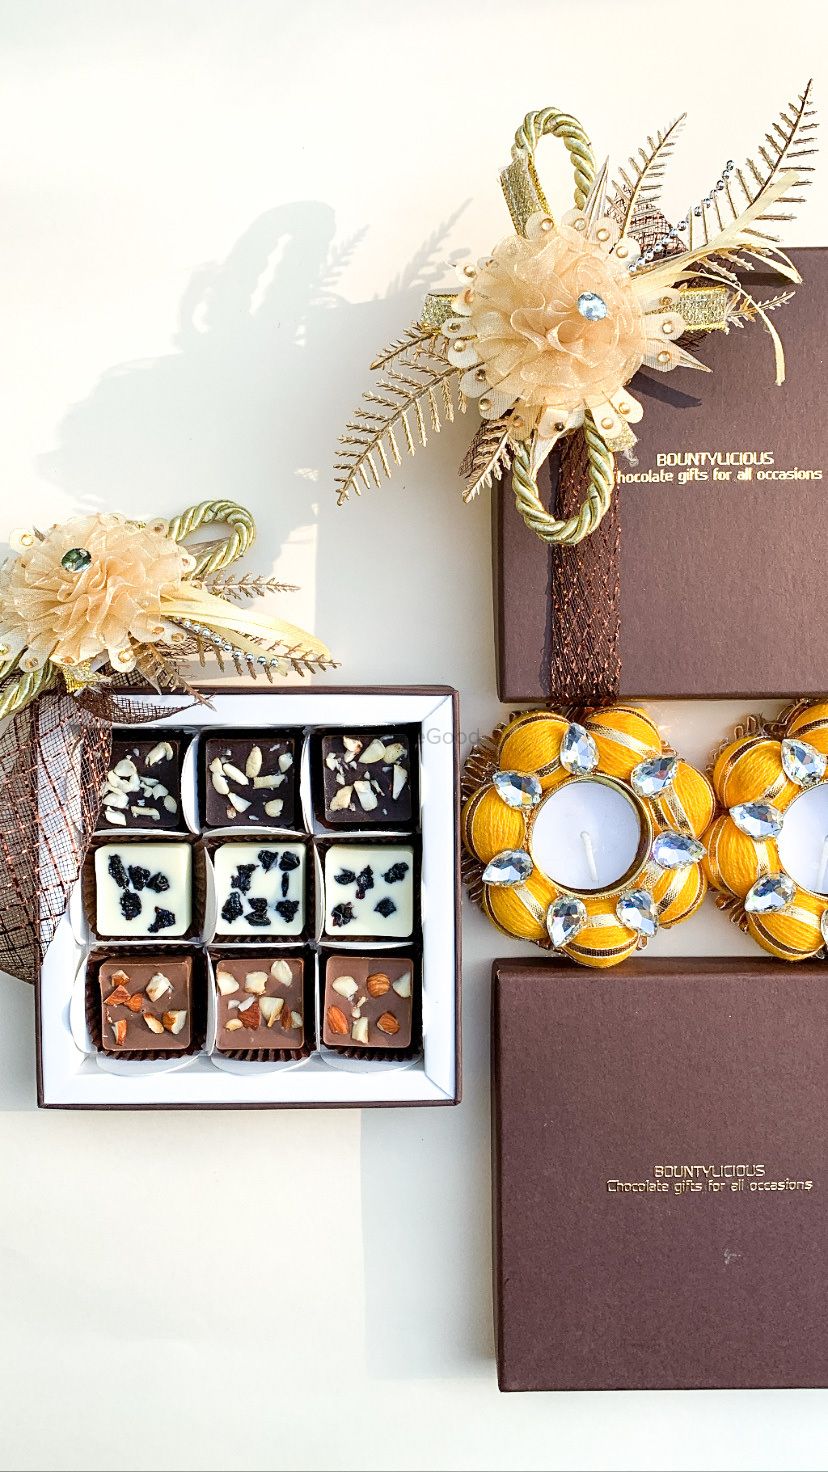 Photo By Bountylicious India Chocolates - Favors